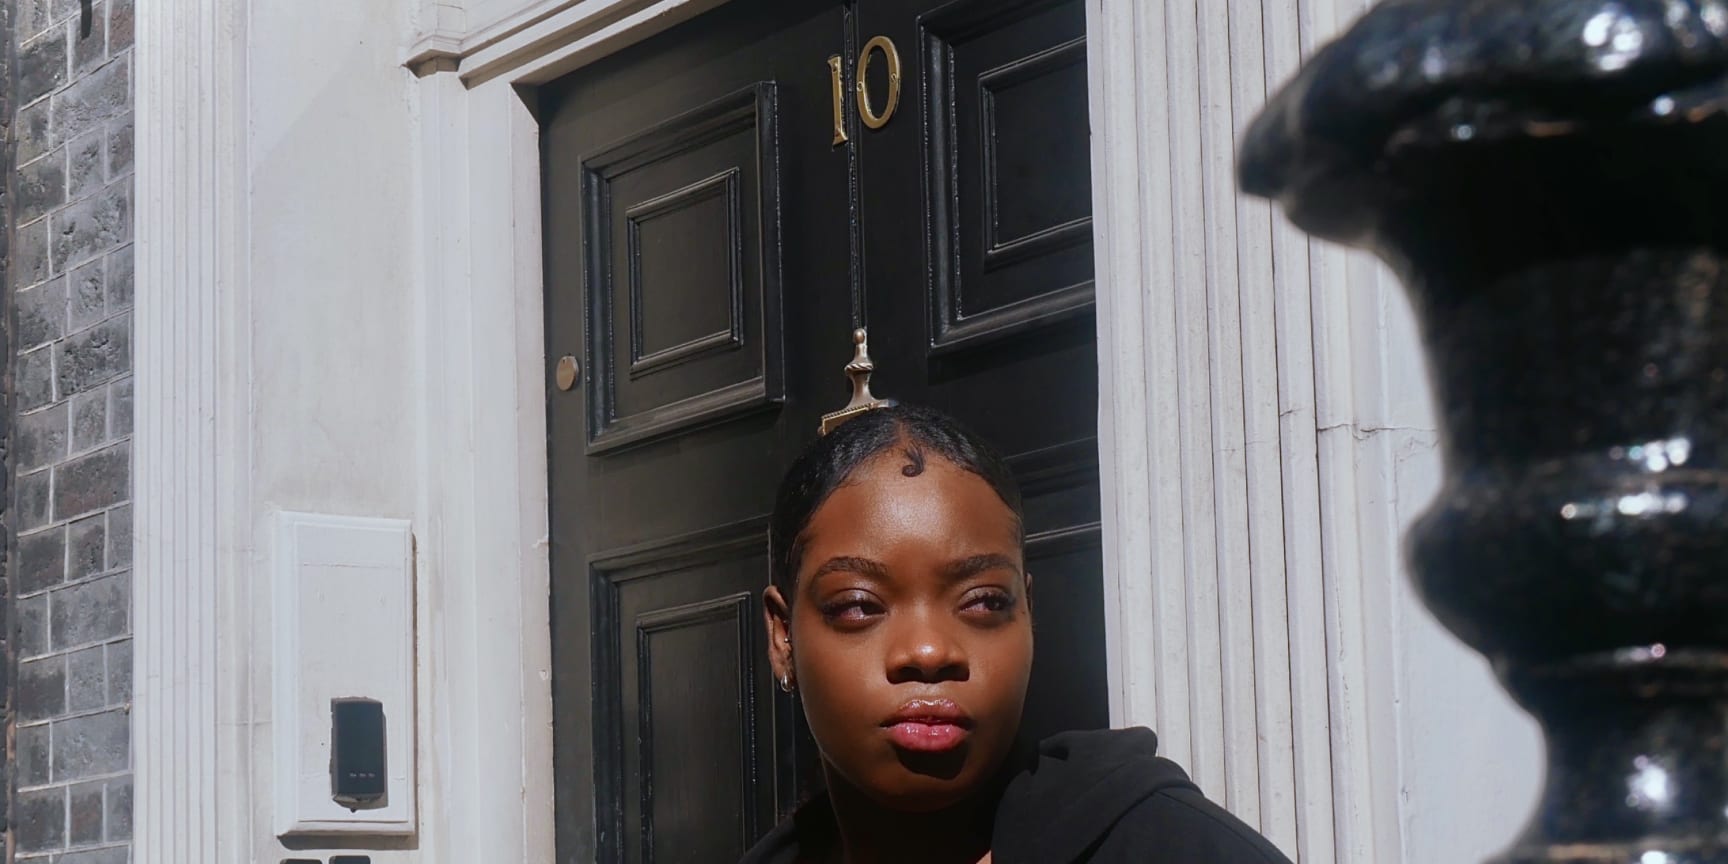 Zakiyyah, a Black woman in hear early twenties, leans against the railing outside no. 10 Downing Street